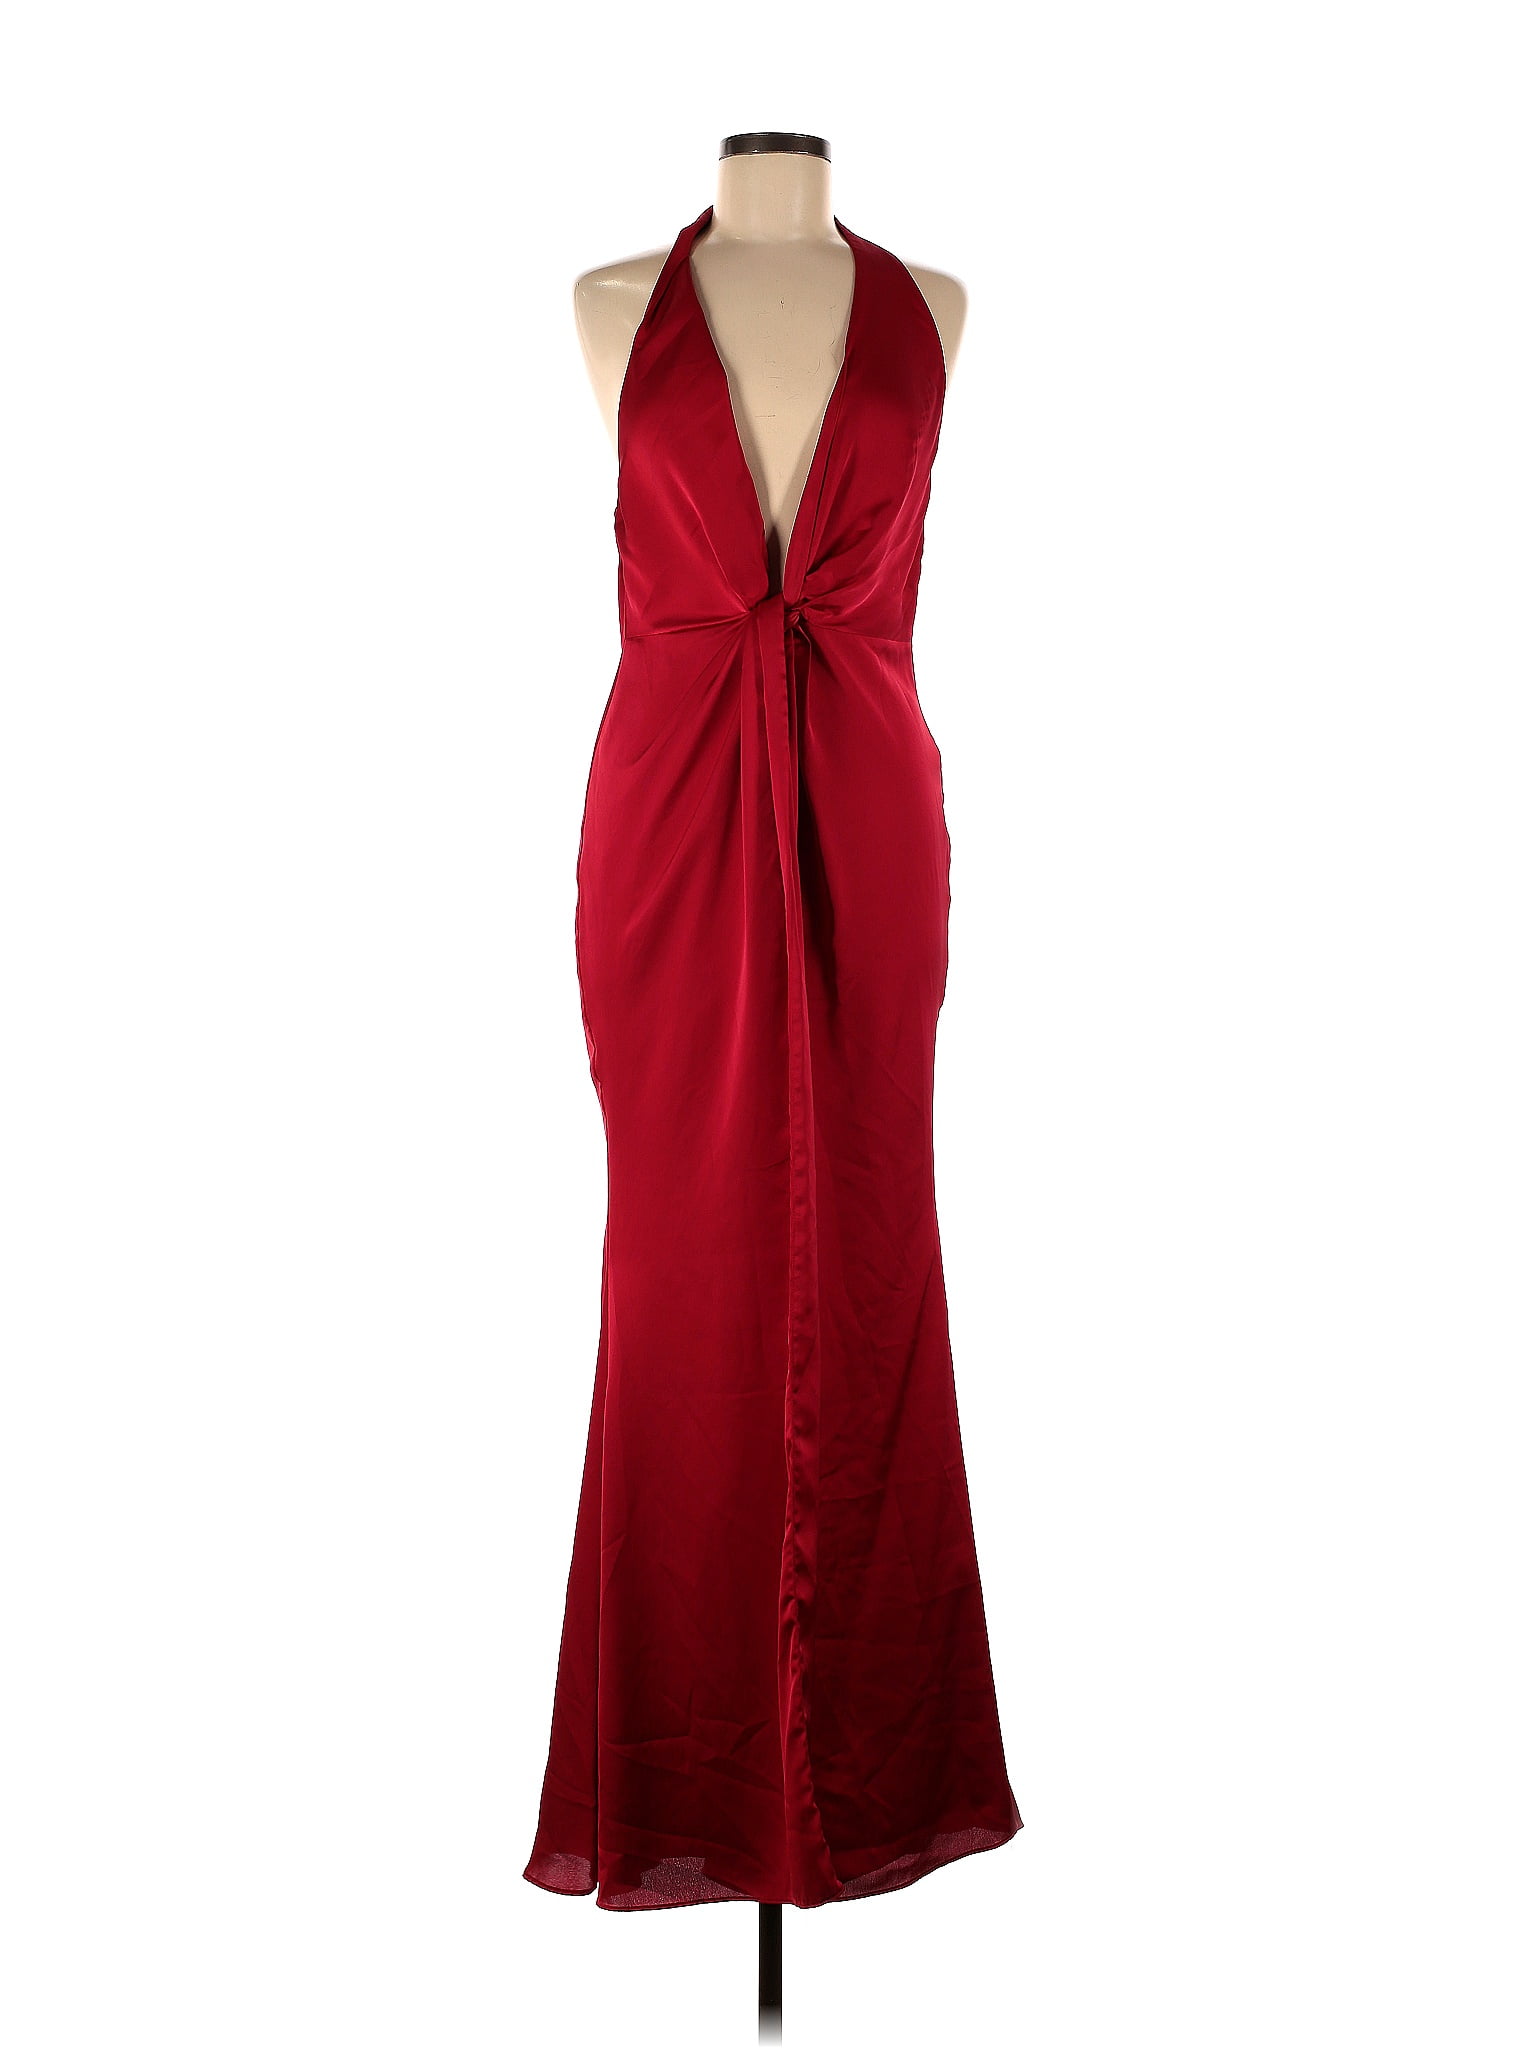 Vania Plunge Halter Gown by Fame & Partners for $50